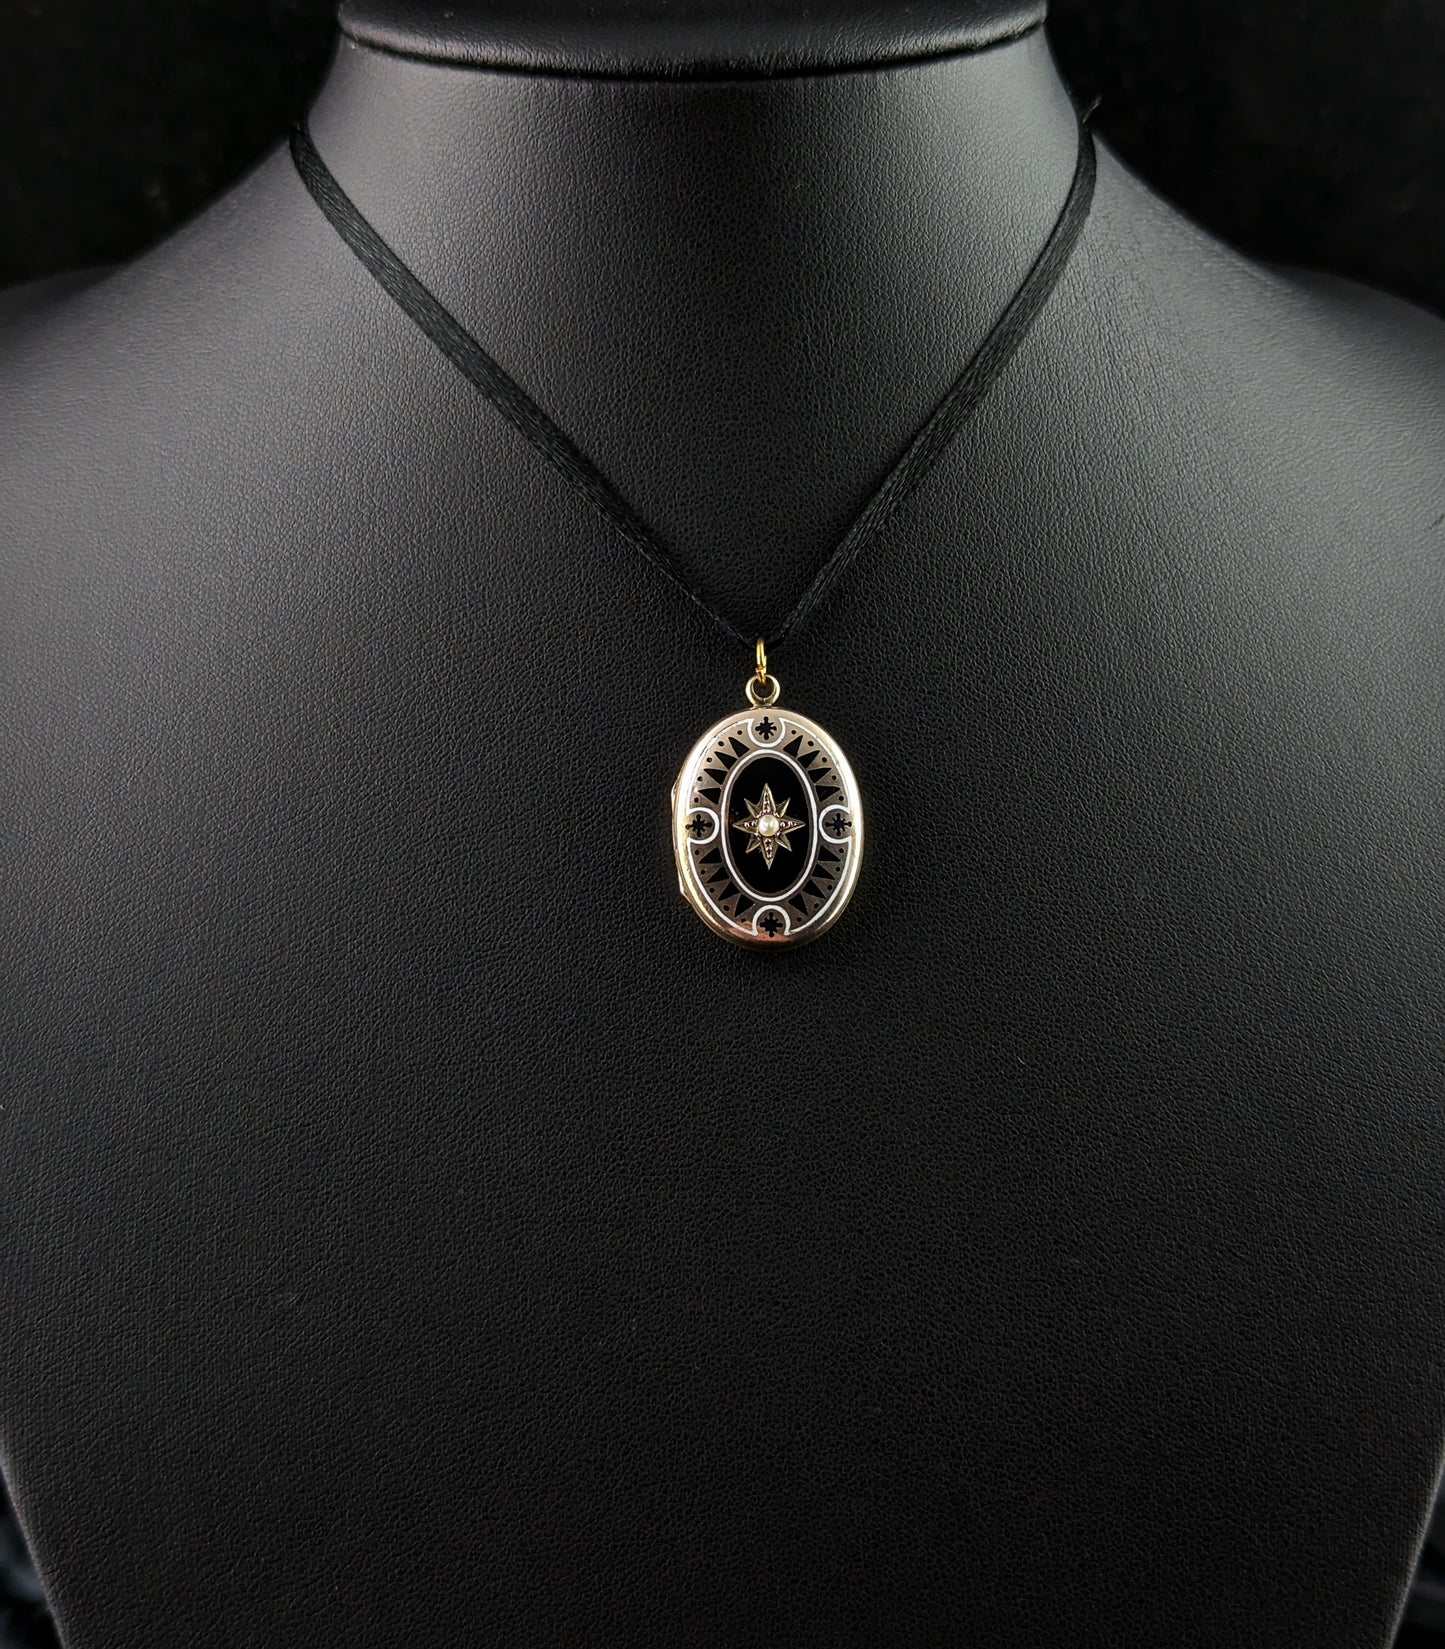 Antique Mourning locket, 9ct gold front and back, Black and White enamel